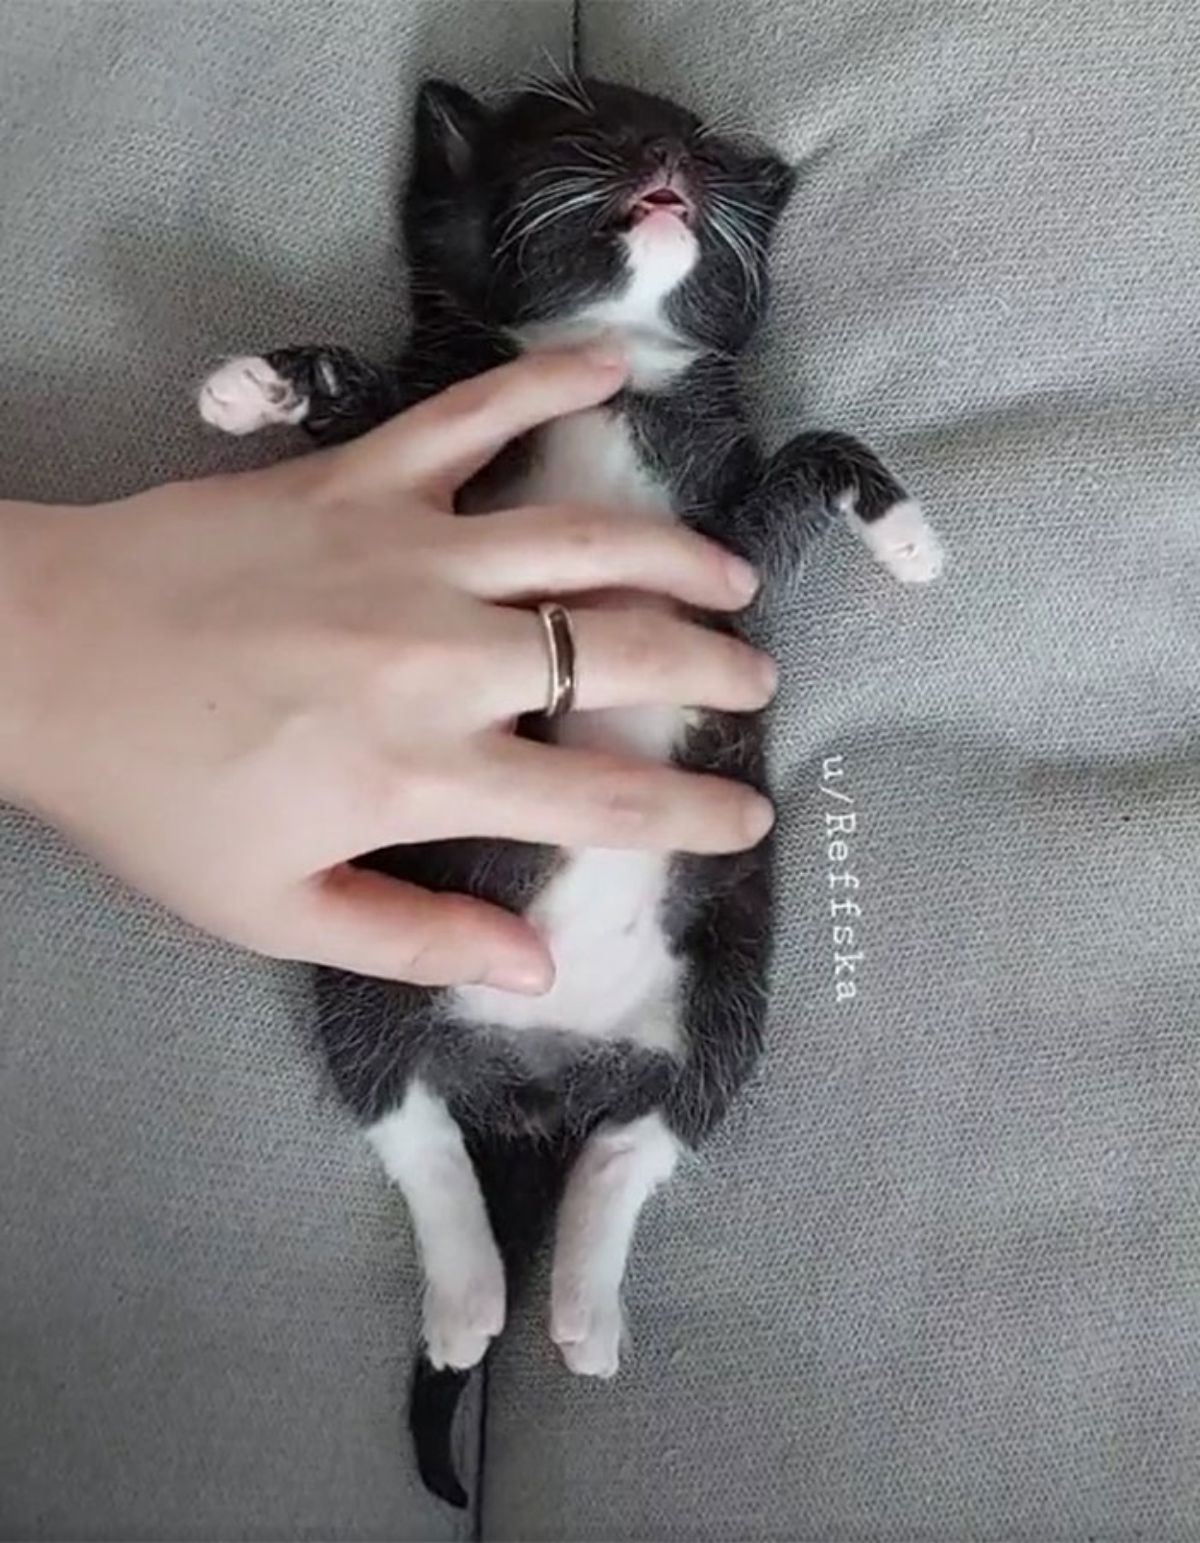 black and white kitten sleeping belly up on a grey surface with someone giving it belly rubs